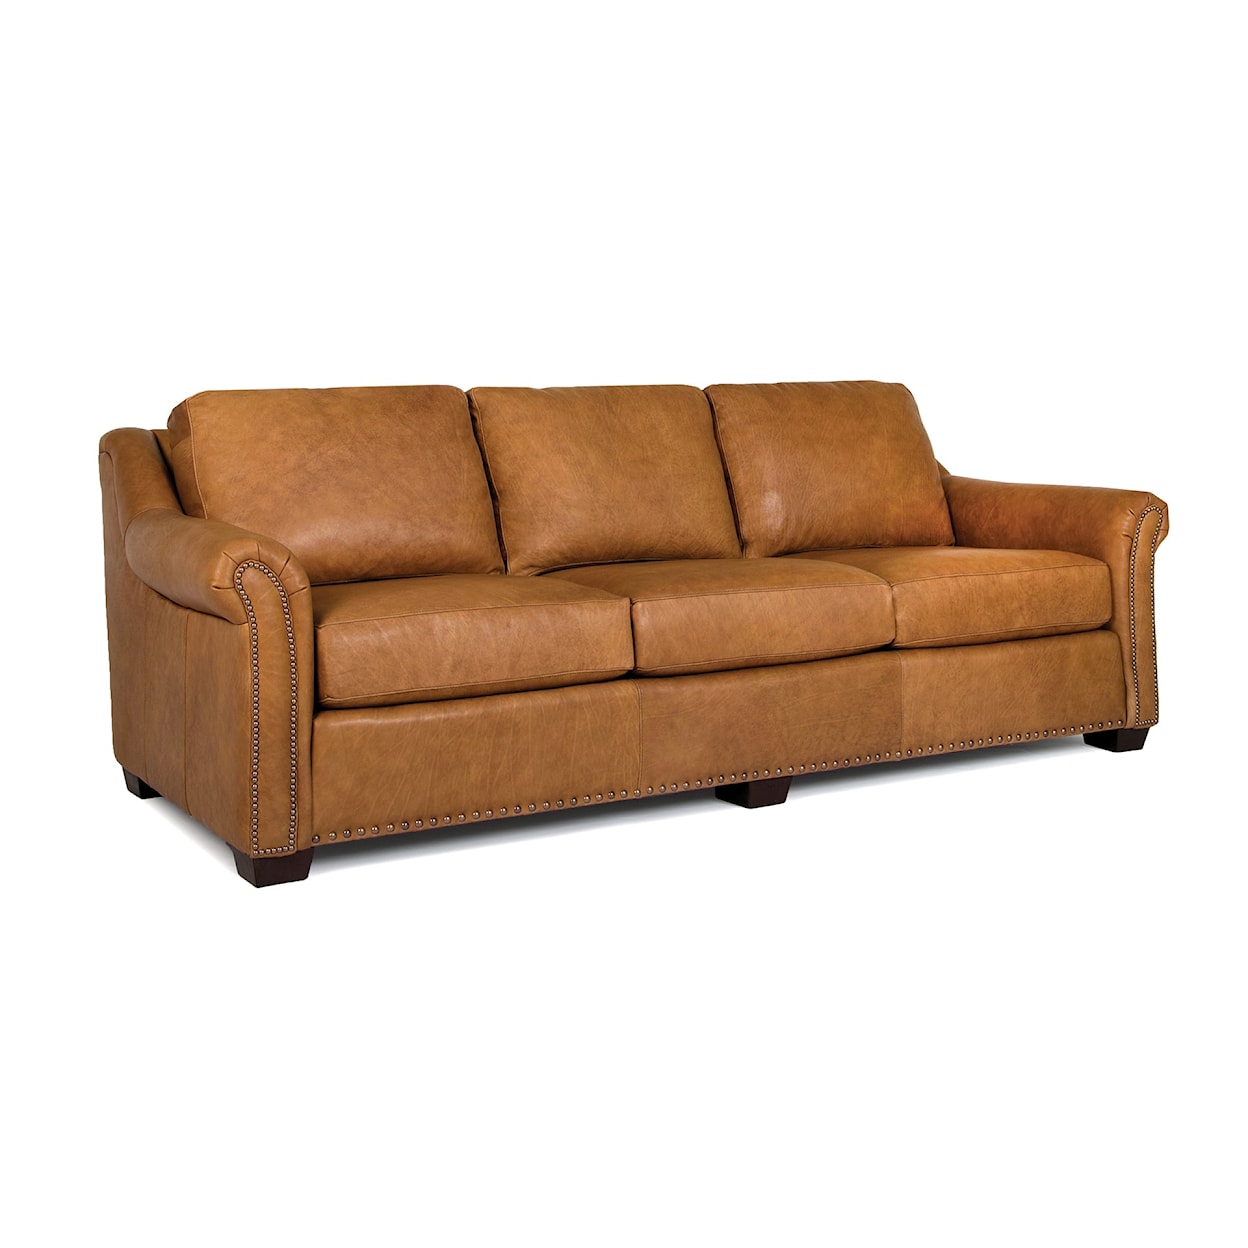 Smith Brothers Build Your Own 9000 Series Leather Large Sofa